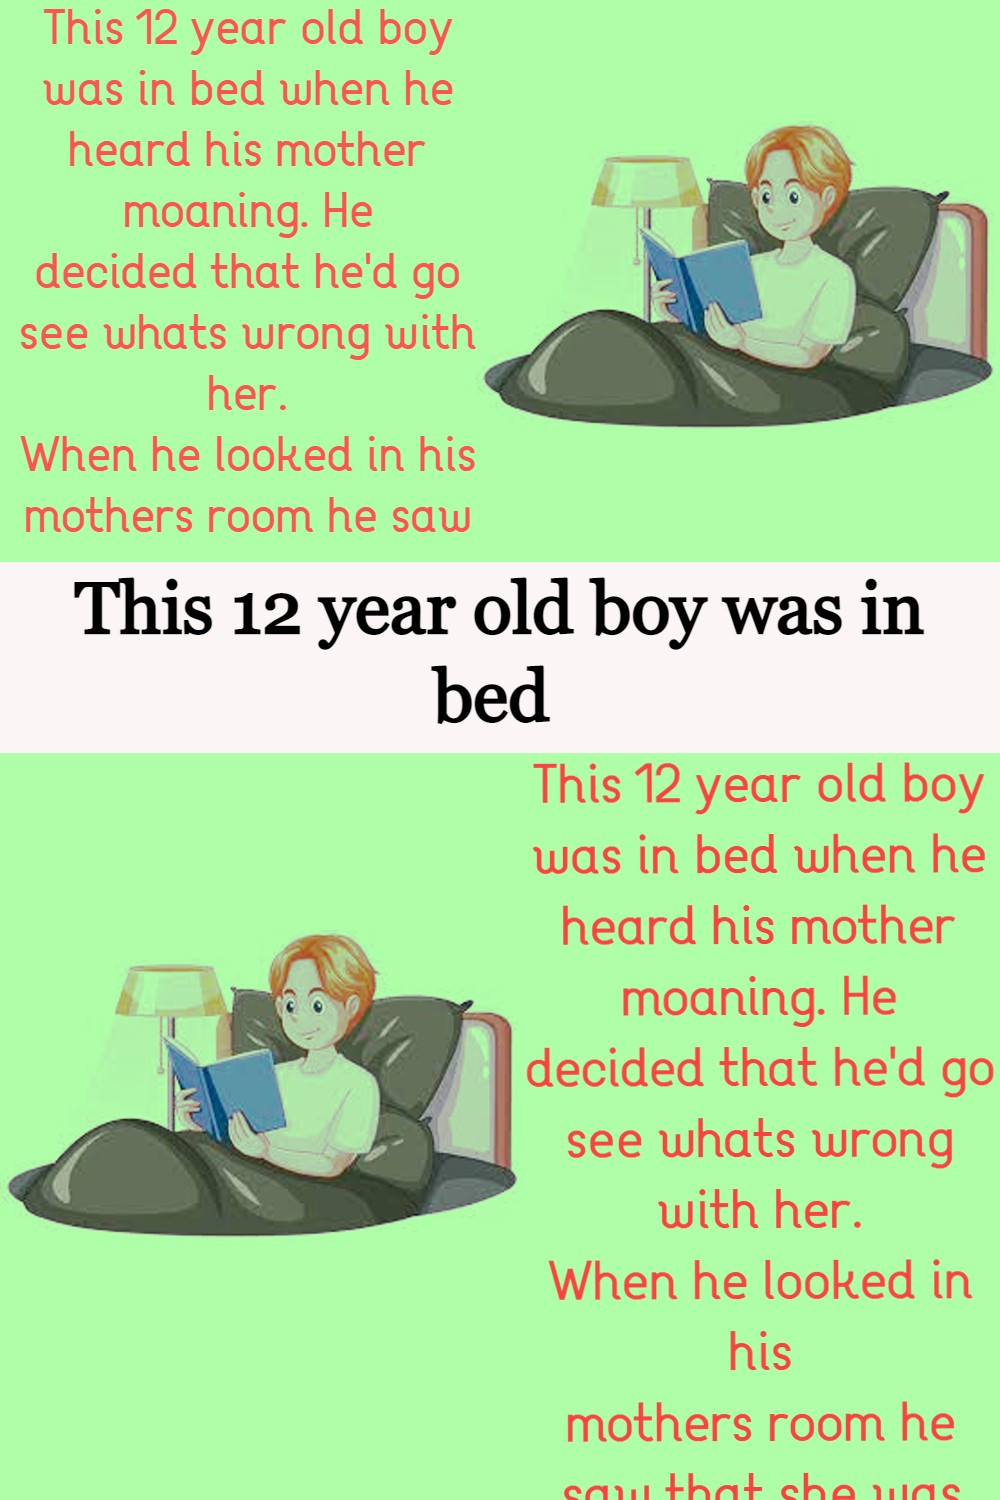 This 12 year old boy was in bed